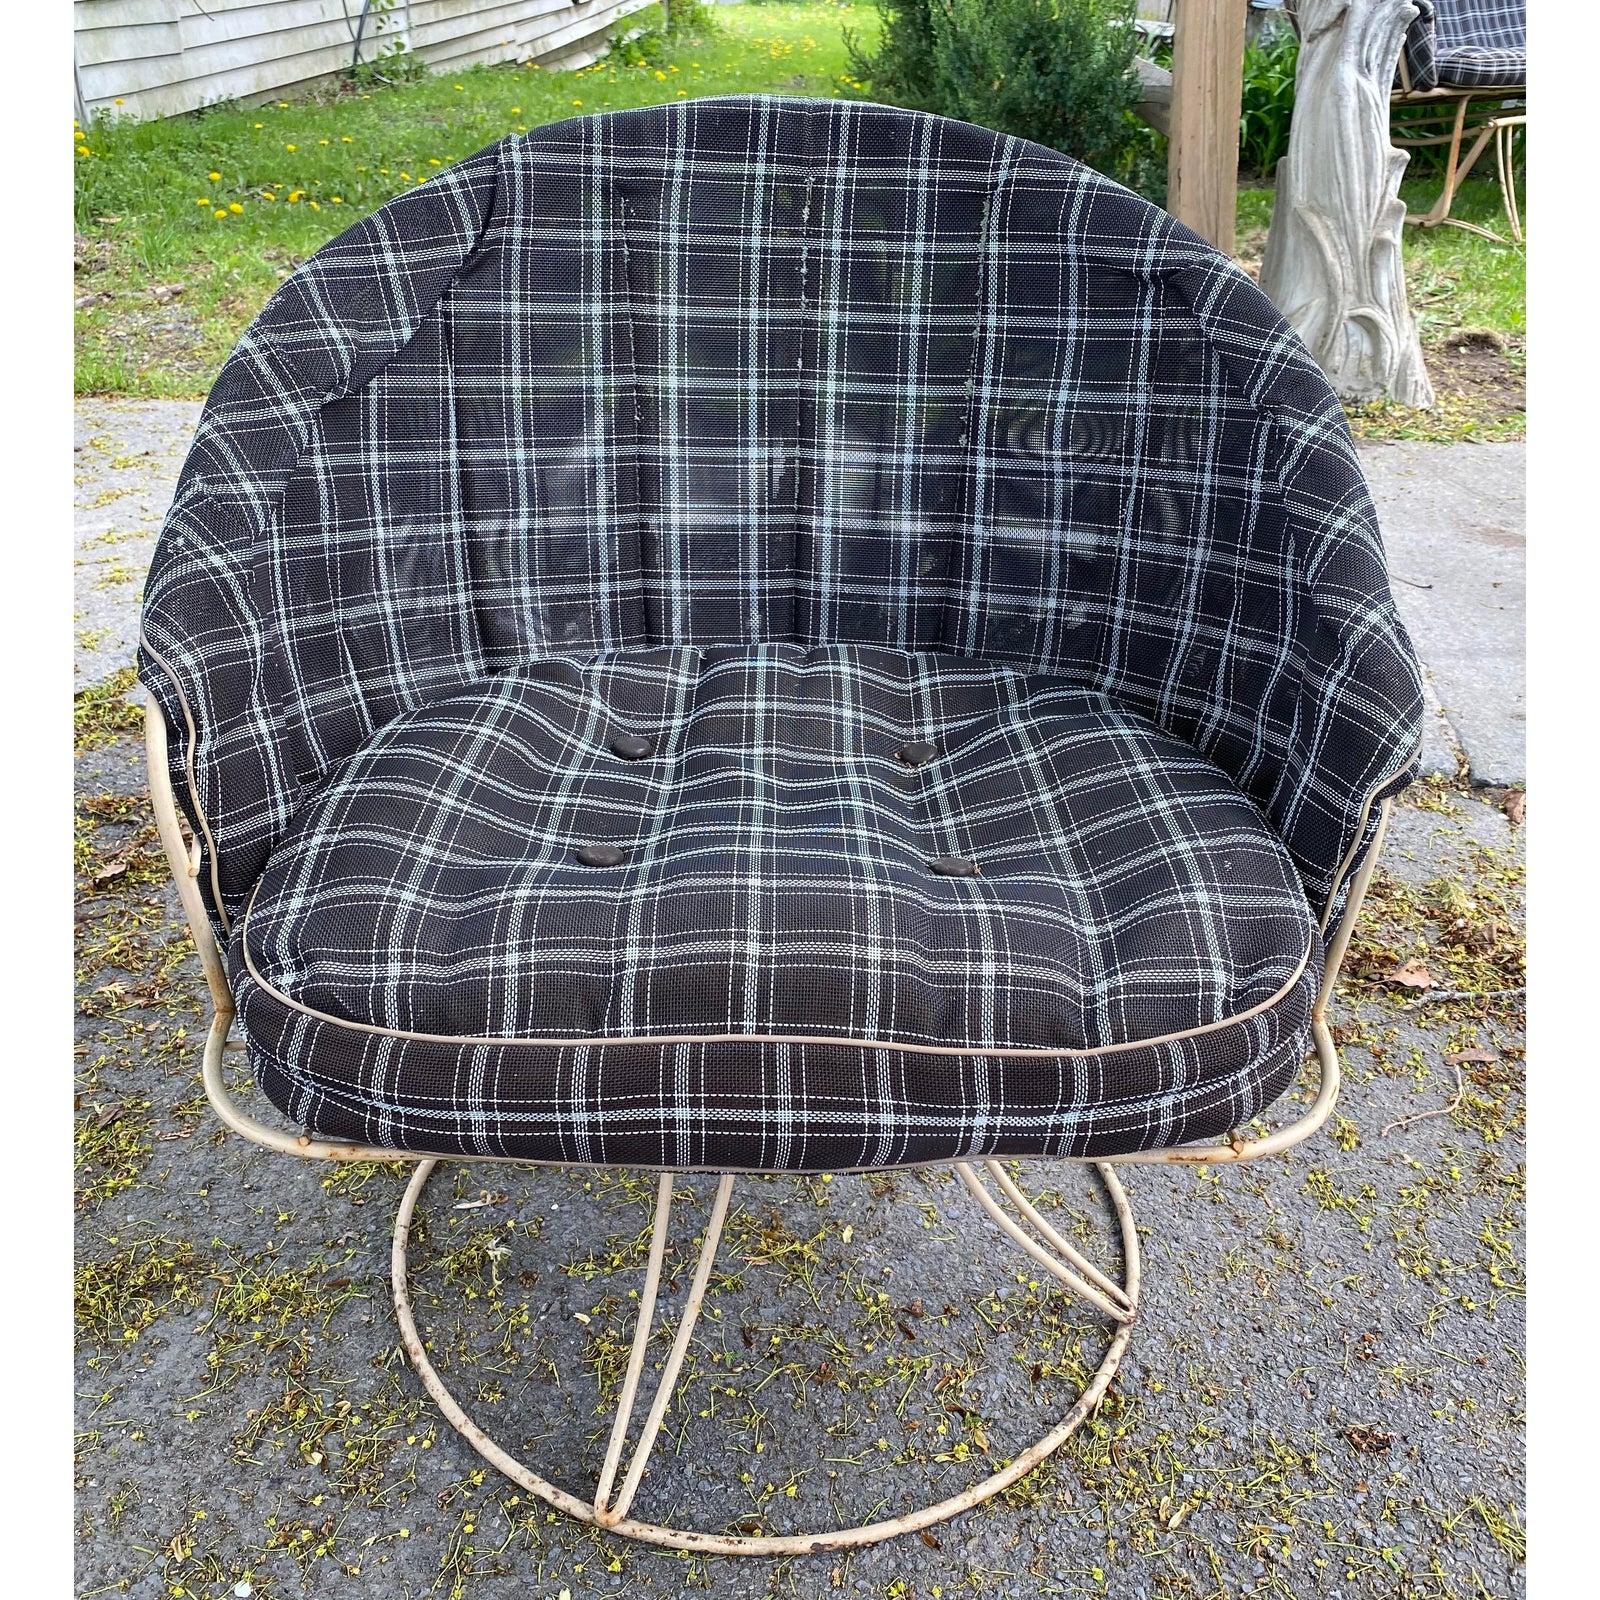 Mid-Century Homecrest Wrought Iron Patio Chair In Good Condition For Sale In Esperance, NY